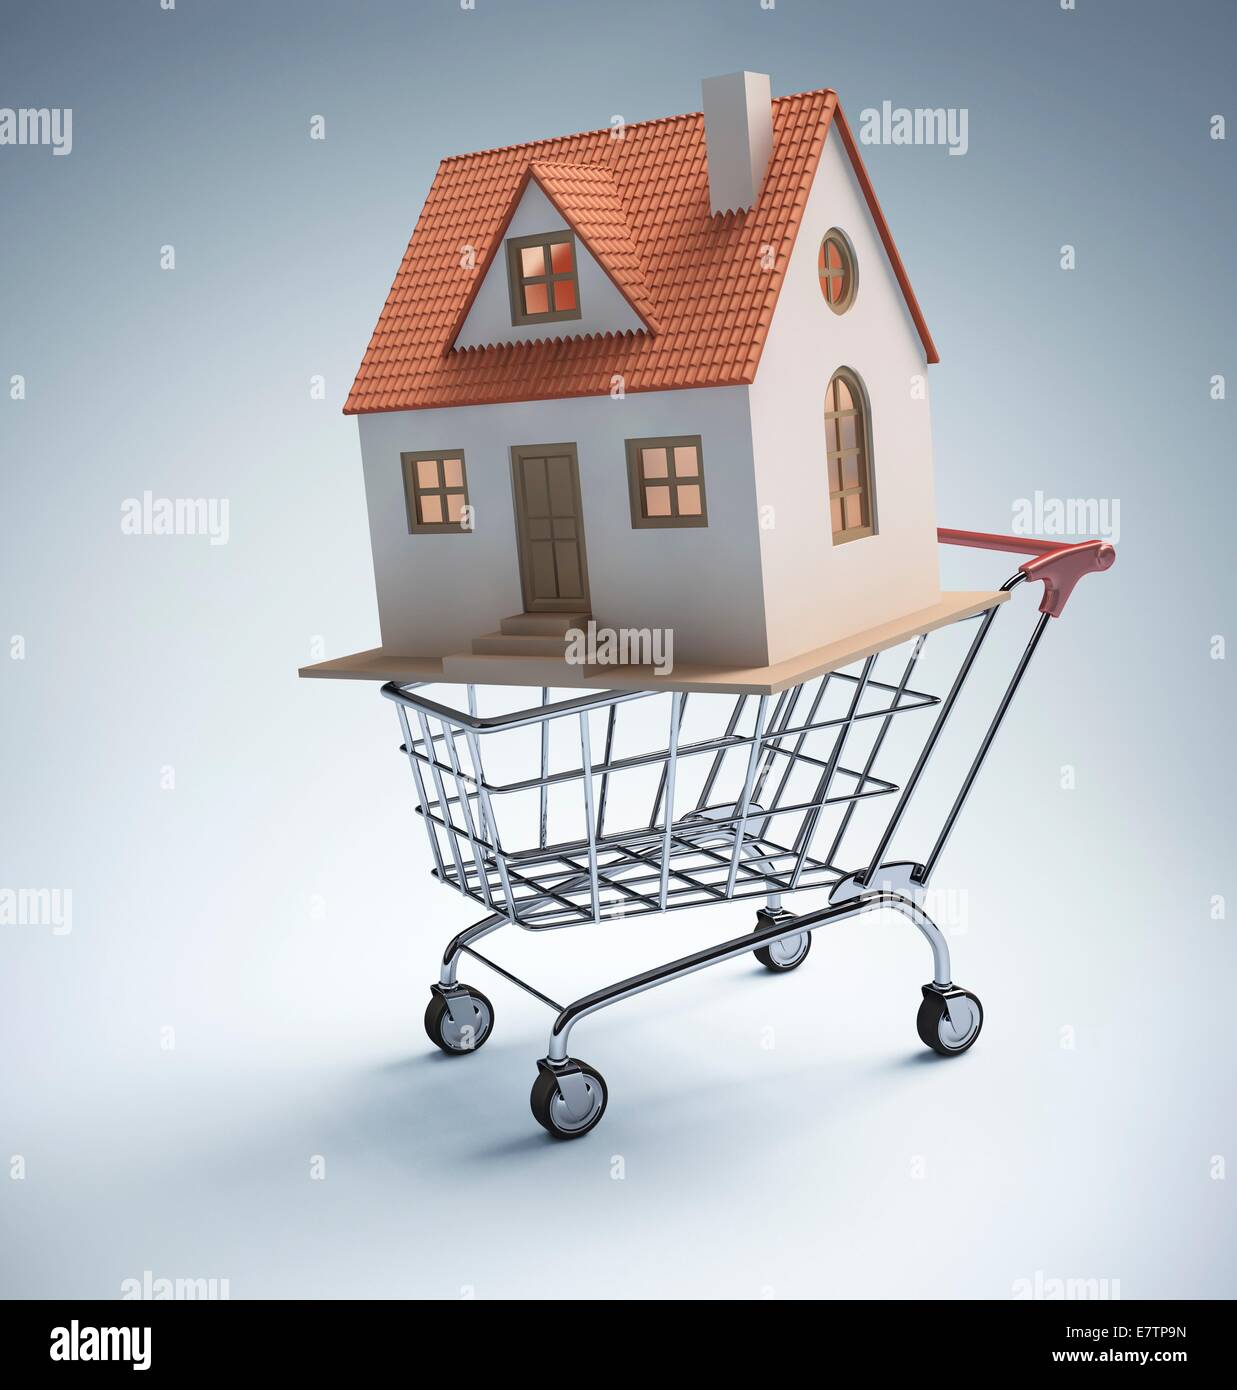 Model of a house in a shopping trolley, computer artwork. Stock Photo